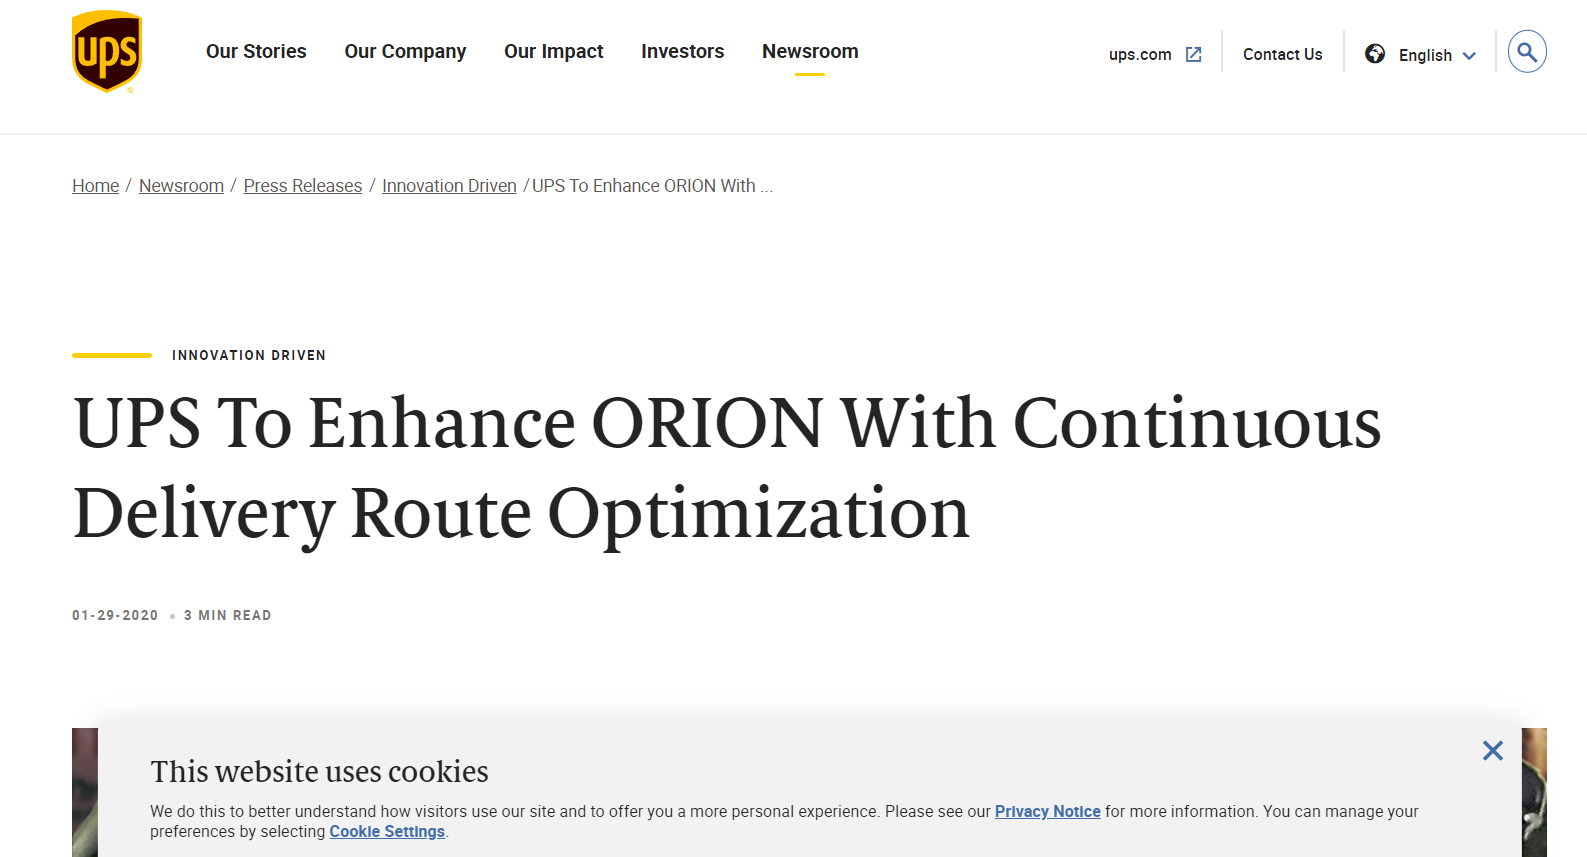 UPS's ORION System: